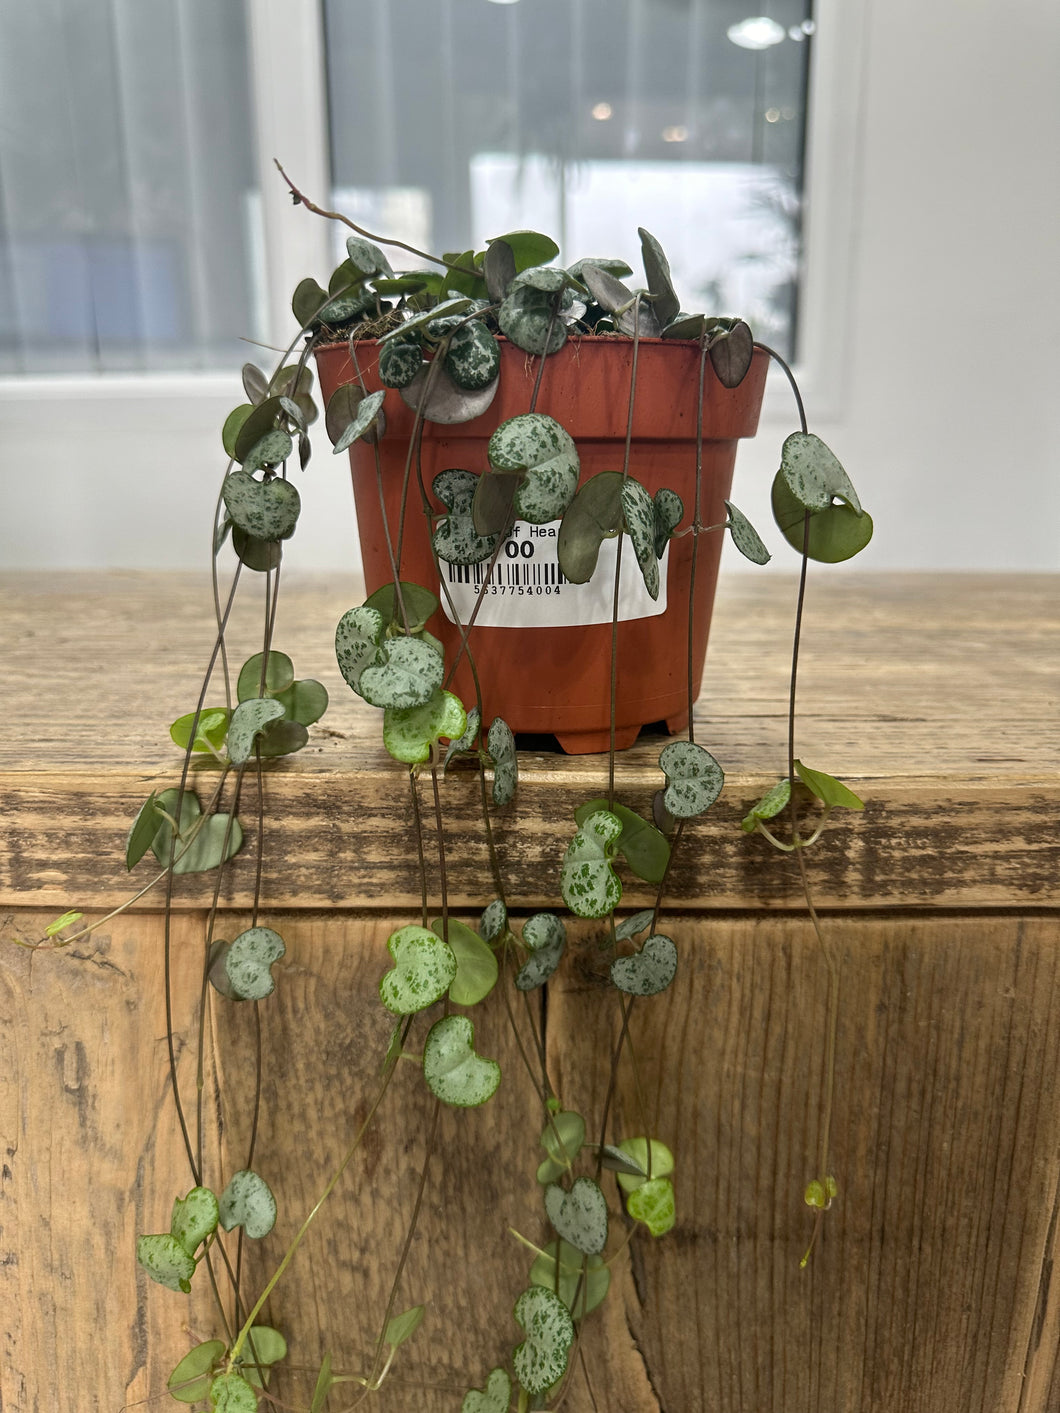 Ceropegia Woodii - String of hearts